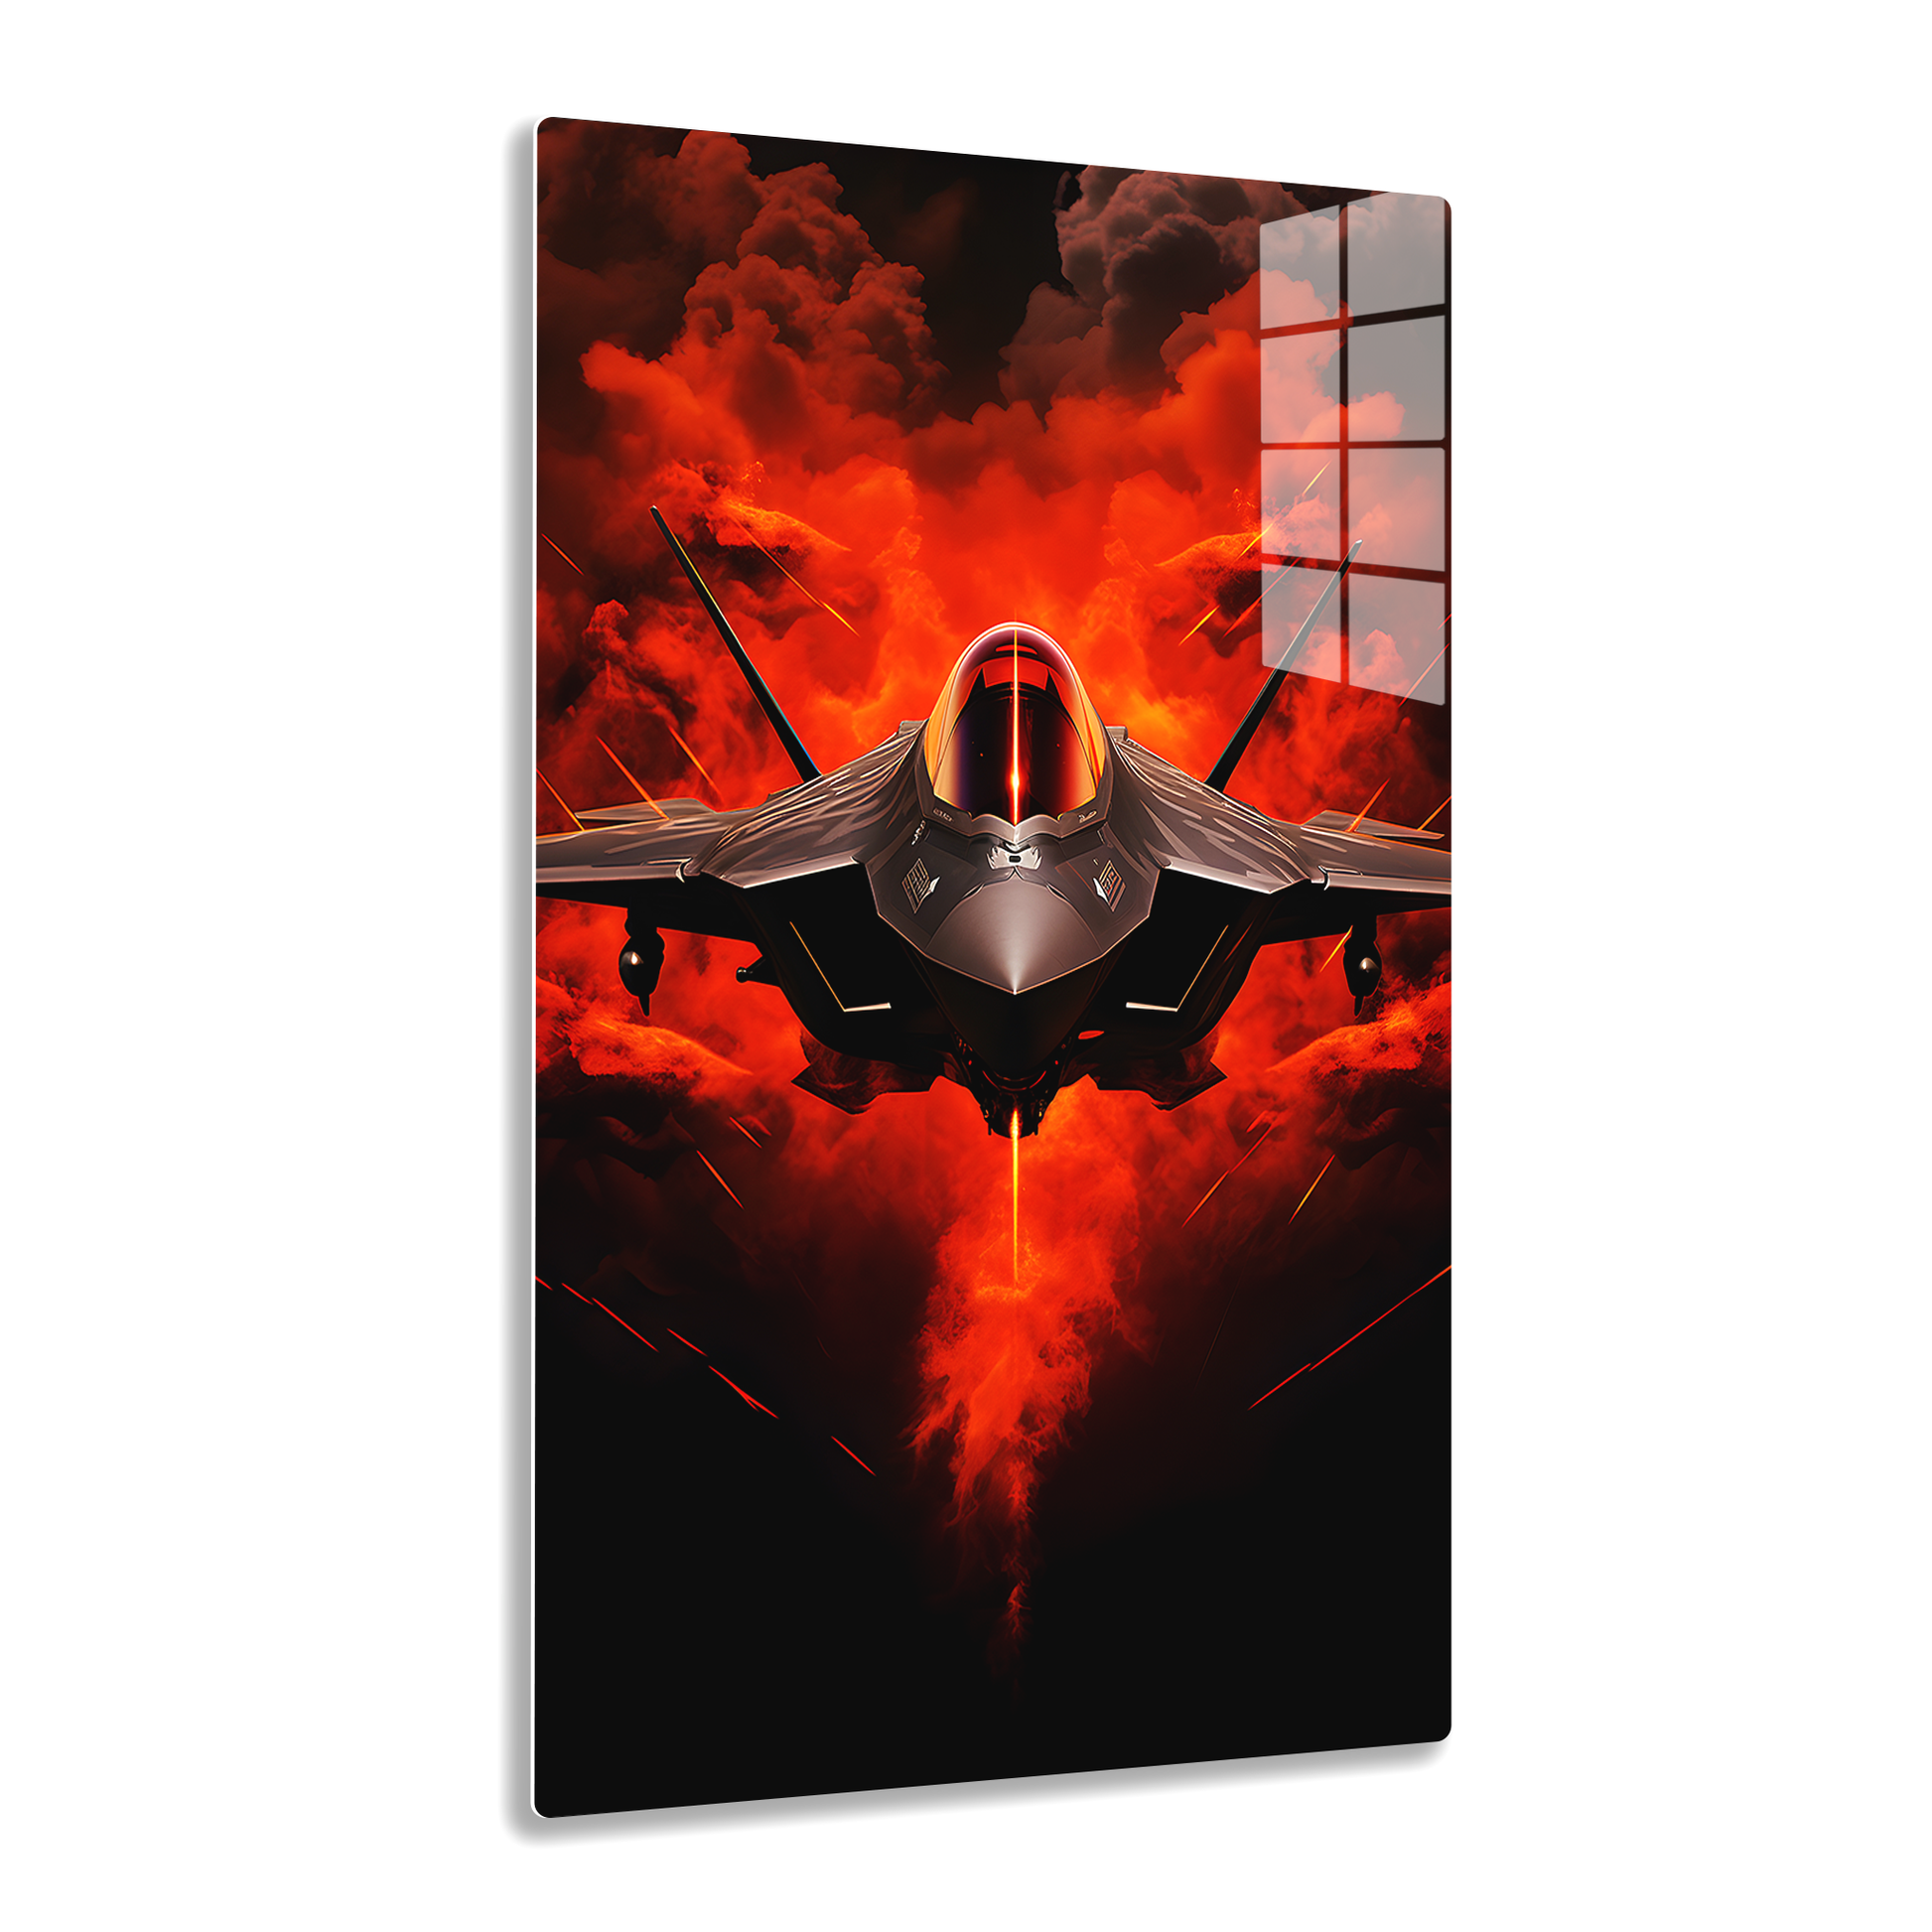 Jet Fighter (Acrylic)F-35: The Acrylic Wall Art with a Glass-Like Finish that Will Take Your Breath AwayElevate Any Ambiance with F-35 Lightning II Acrylic Print🌟:Discover the brilliancRimaGallery